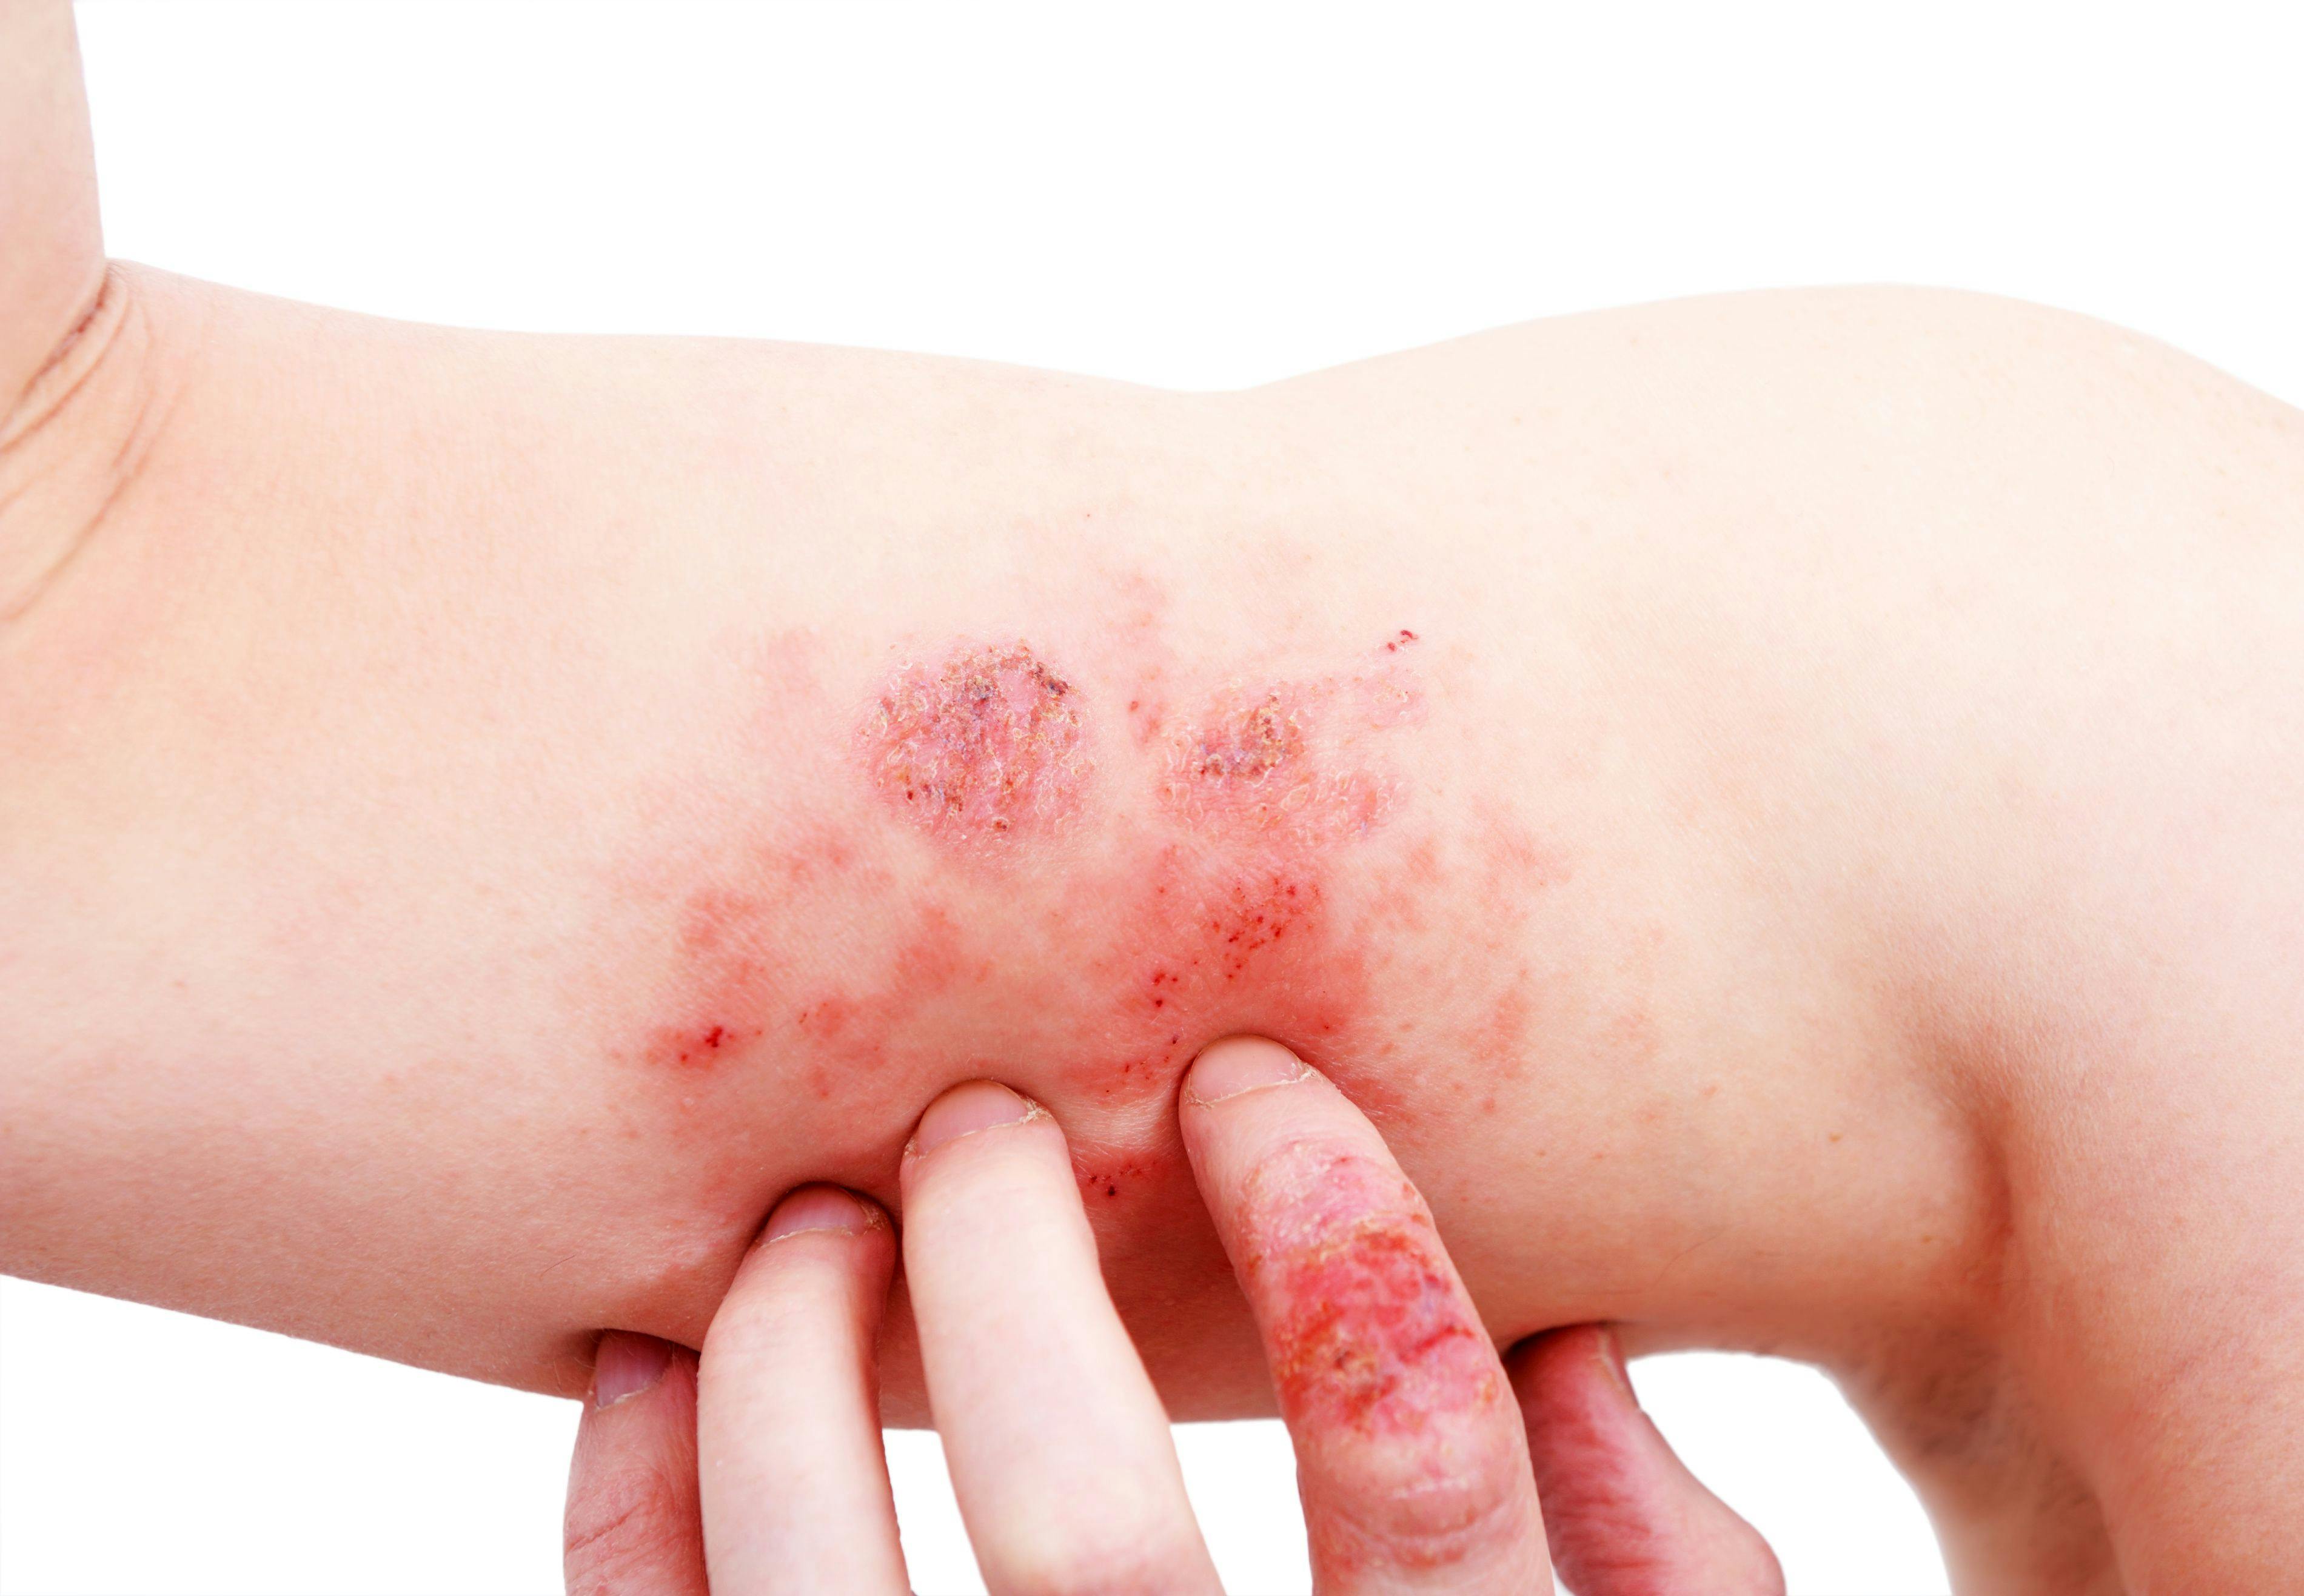 person scratching atopic dermatitis on their arm - Image Credit: lial88 - stock.adobe.com